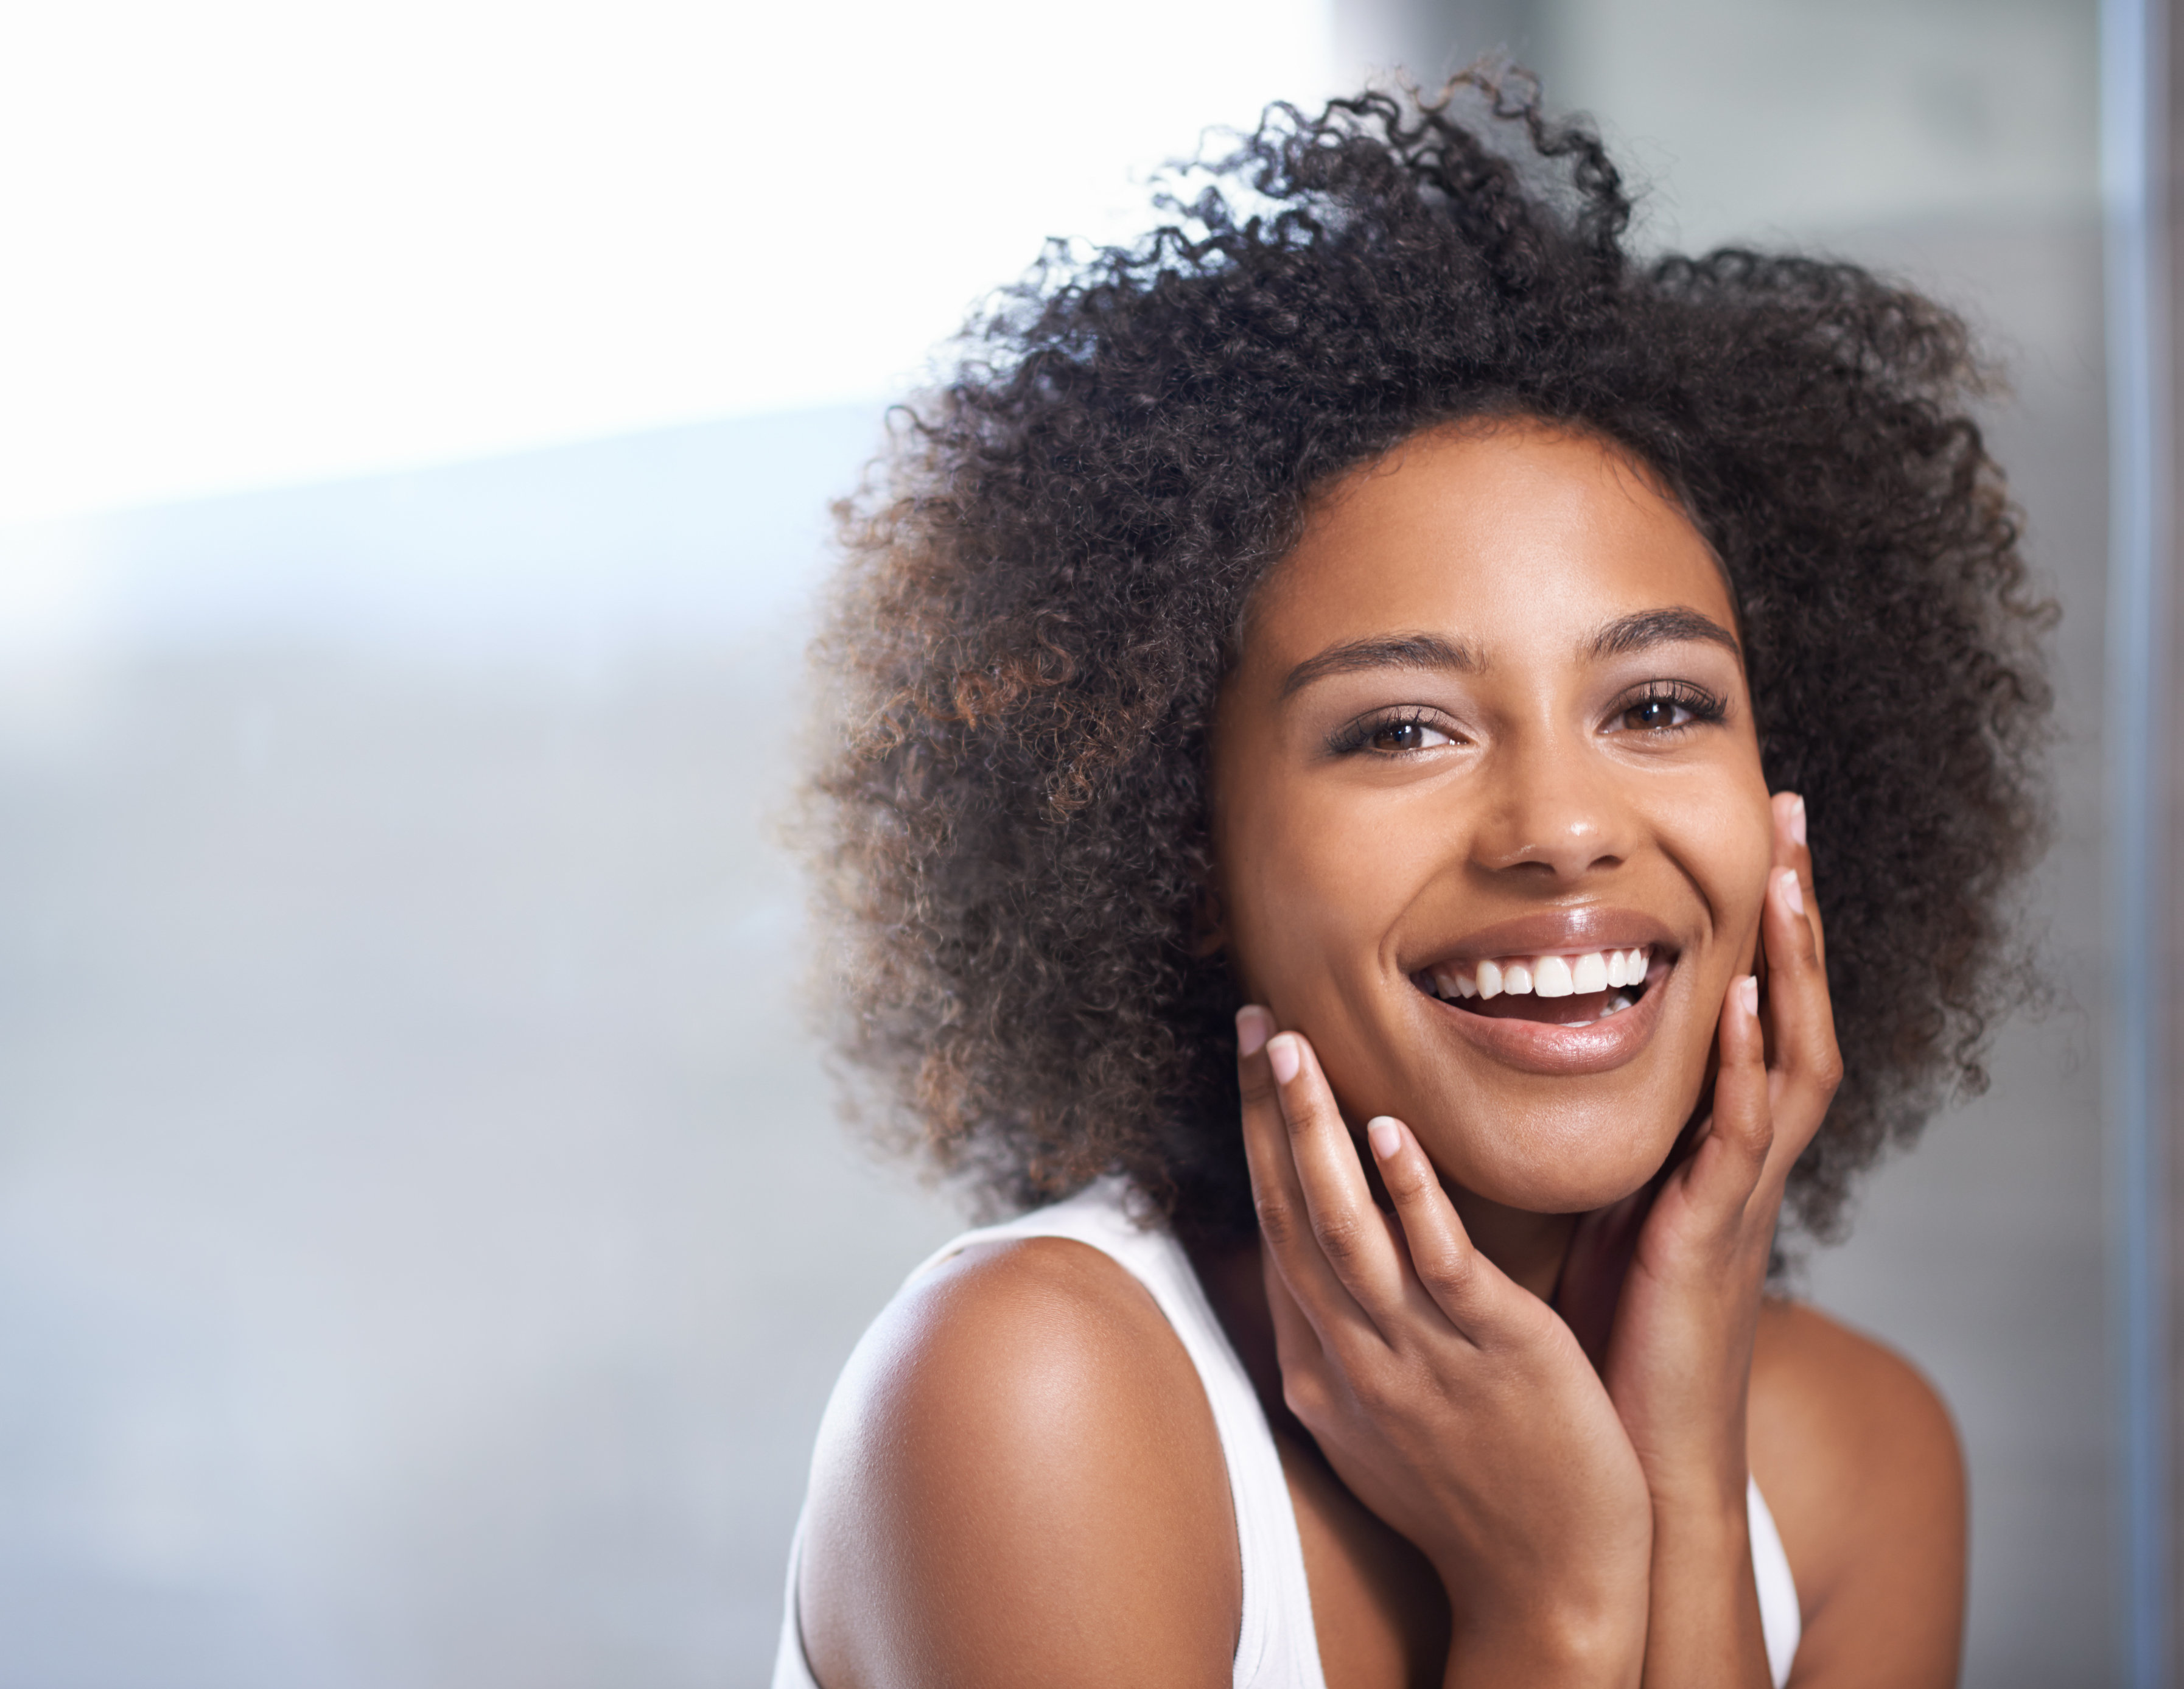 How To Get The No-Makeup Look On Dark Skin Beauty Products To Try HuffPost UK Style image photo